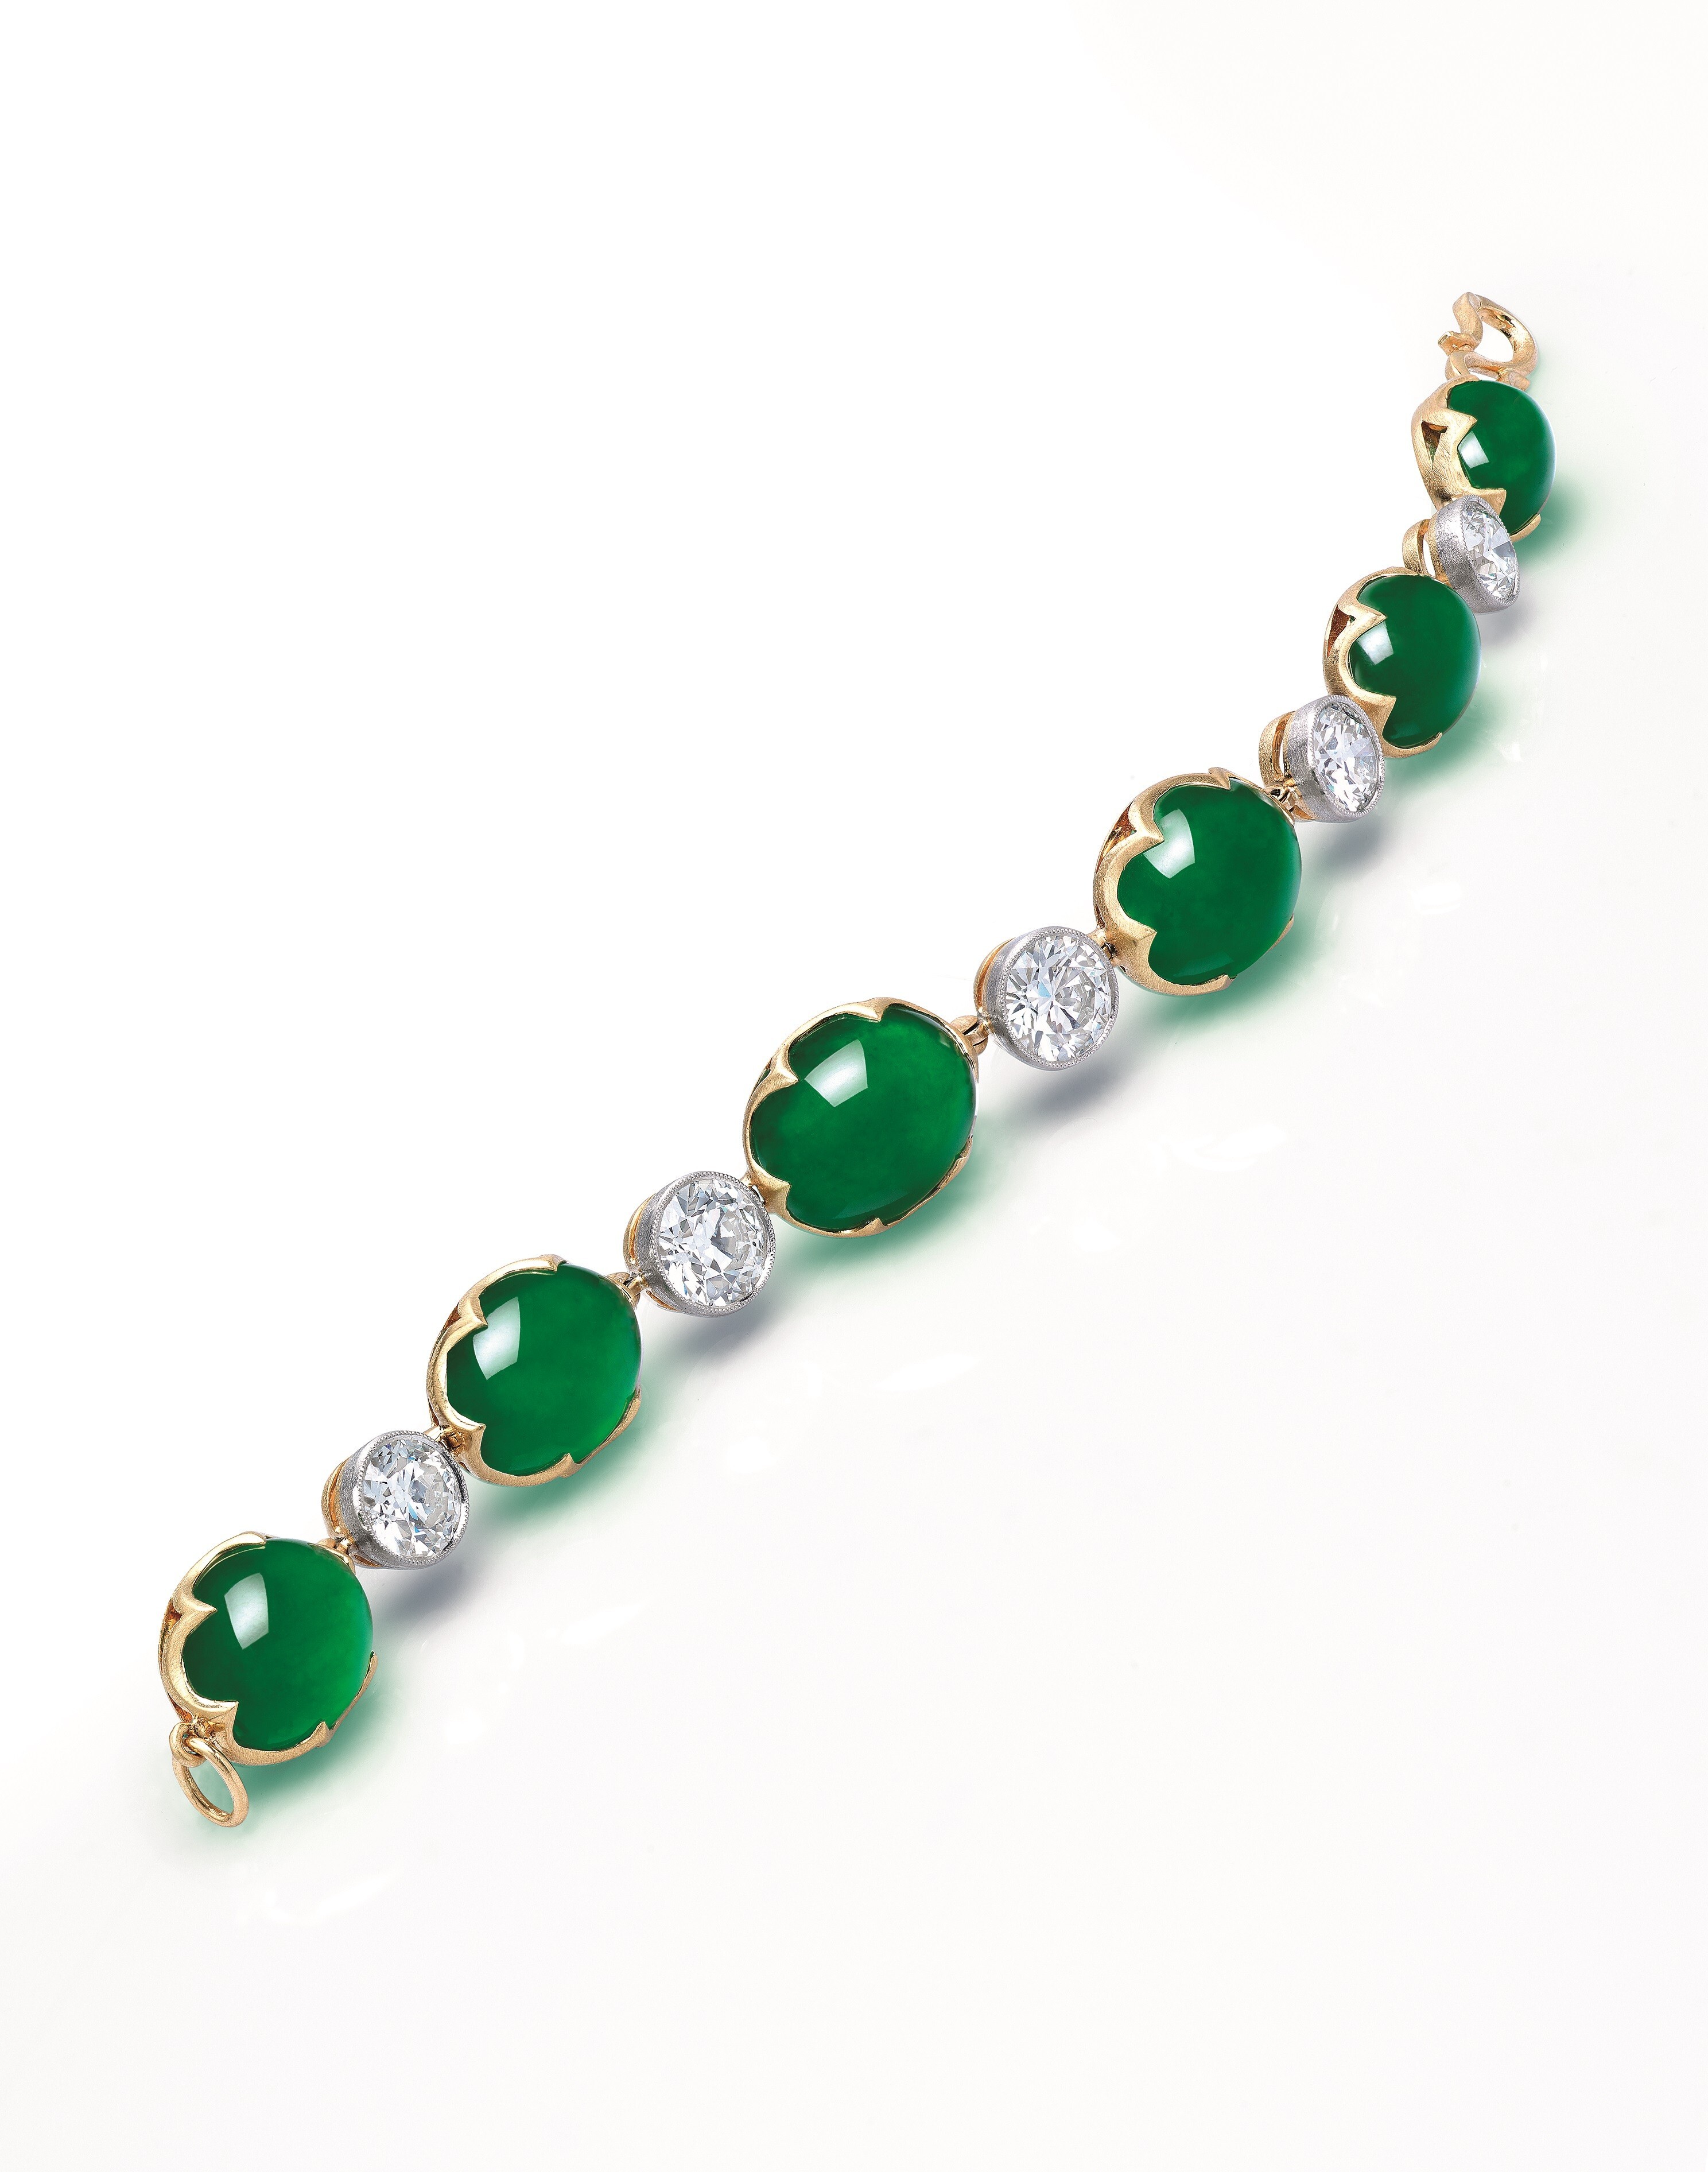 Record-breaking jadeite bracelet sold by Christie’s – a most sought after gemstone by Asian collectors. Photo: Christie’s